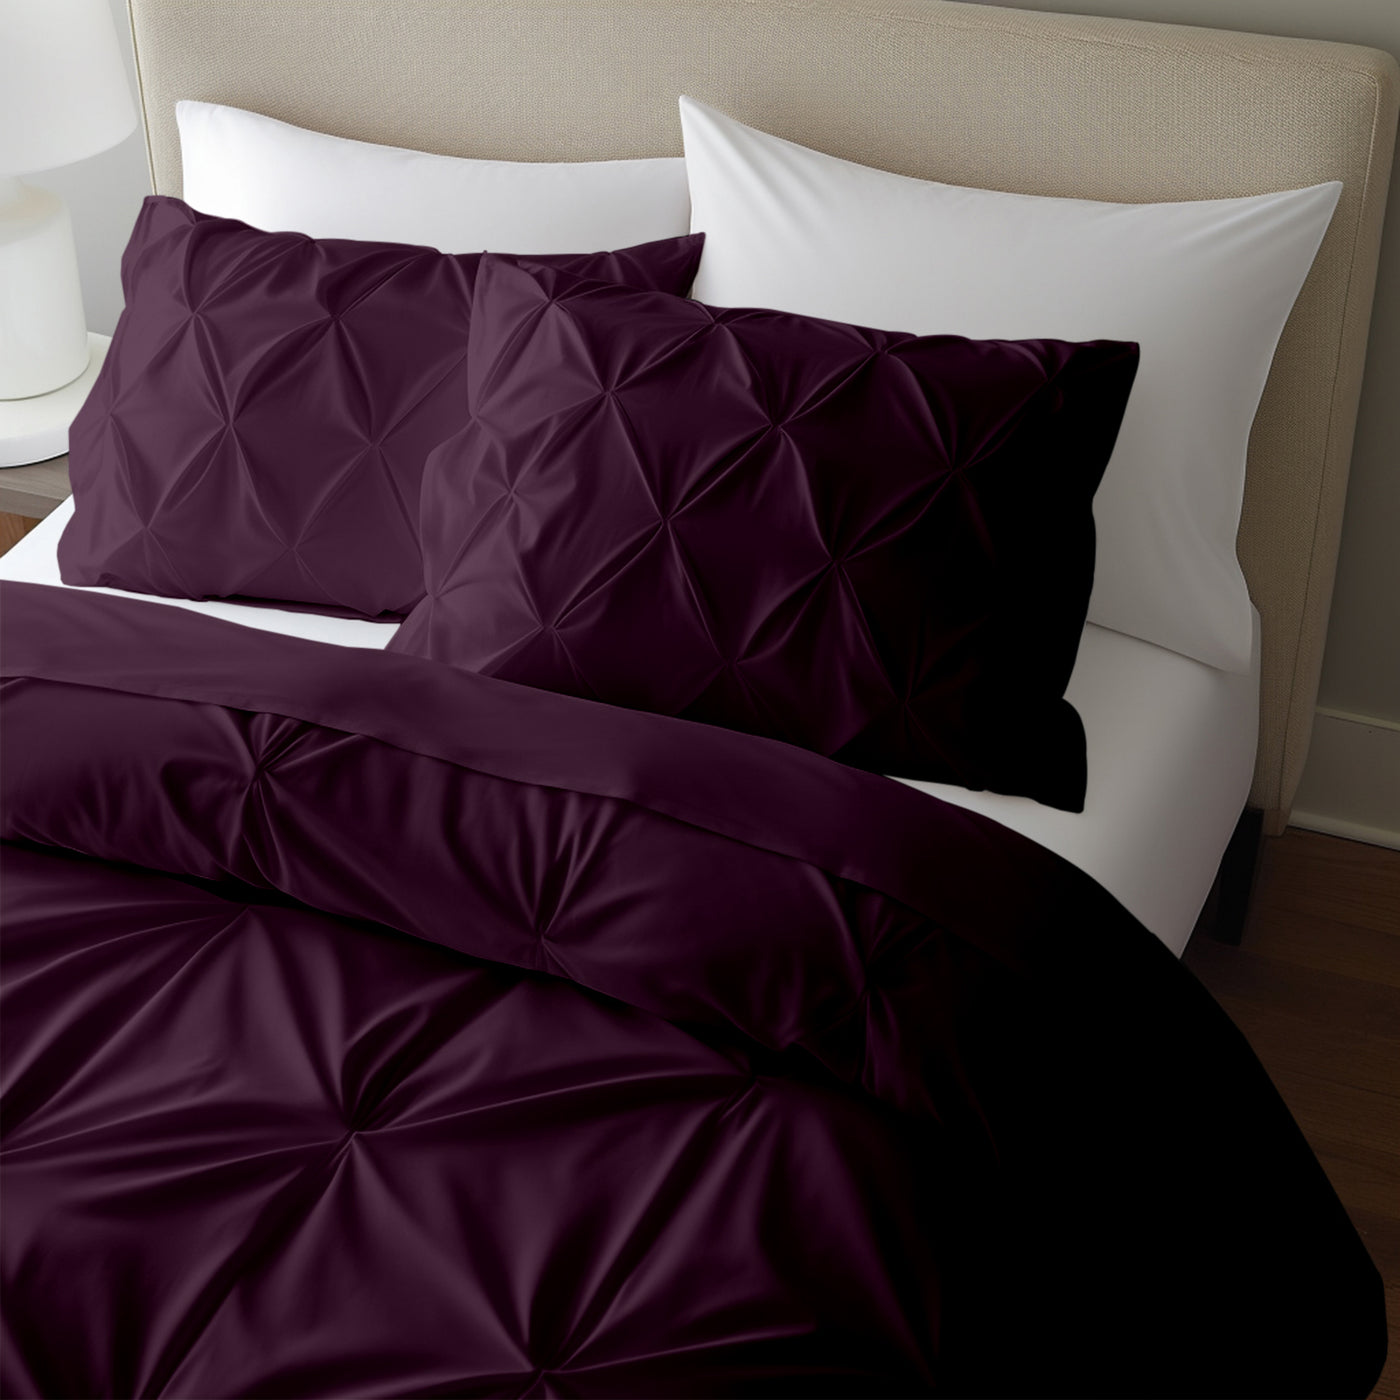 Pinch Pleated 3 Piece Duvet Cover Set 100% Egyptian Cotton 600 Thread Count - Dark Colors